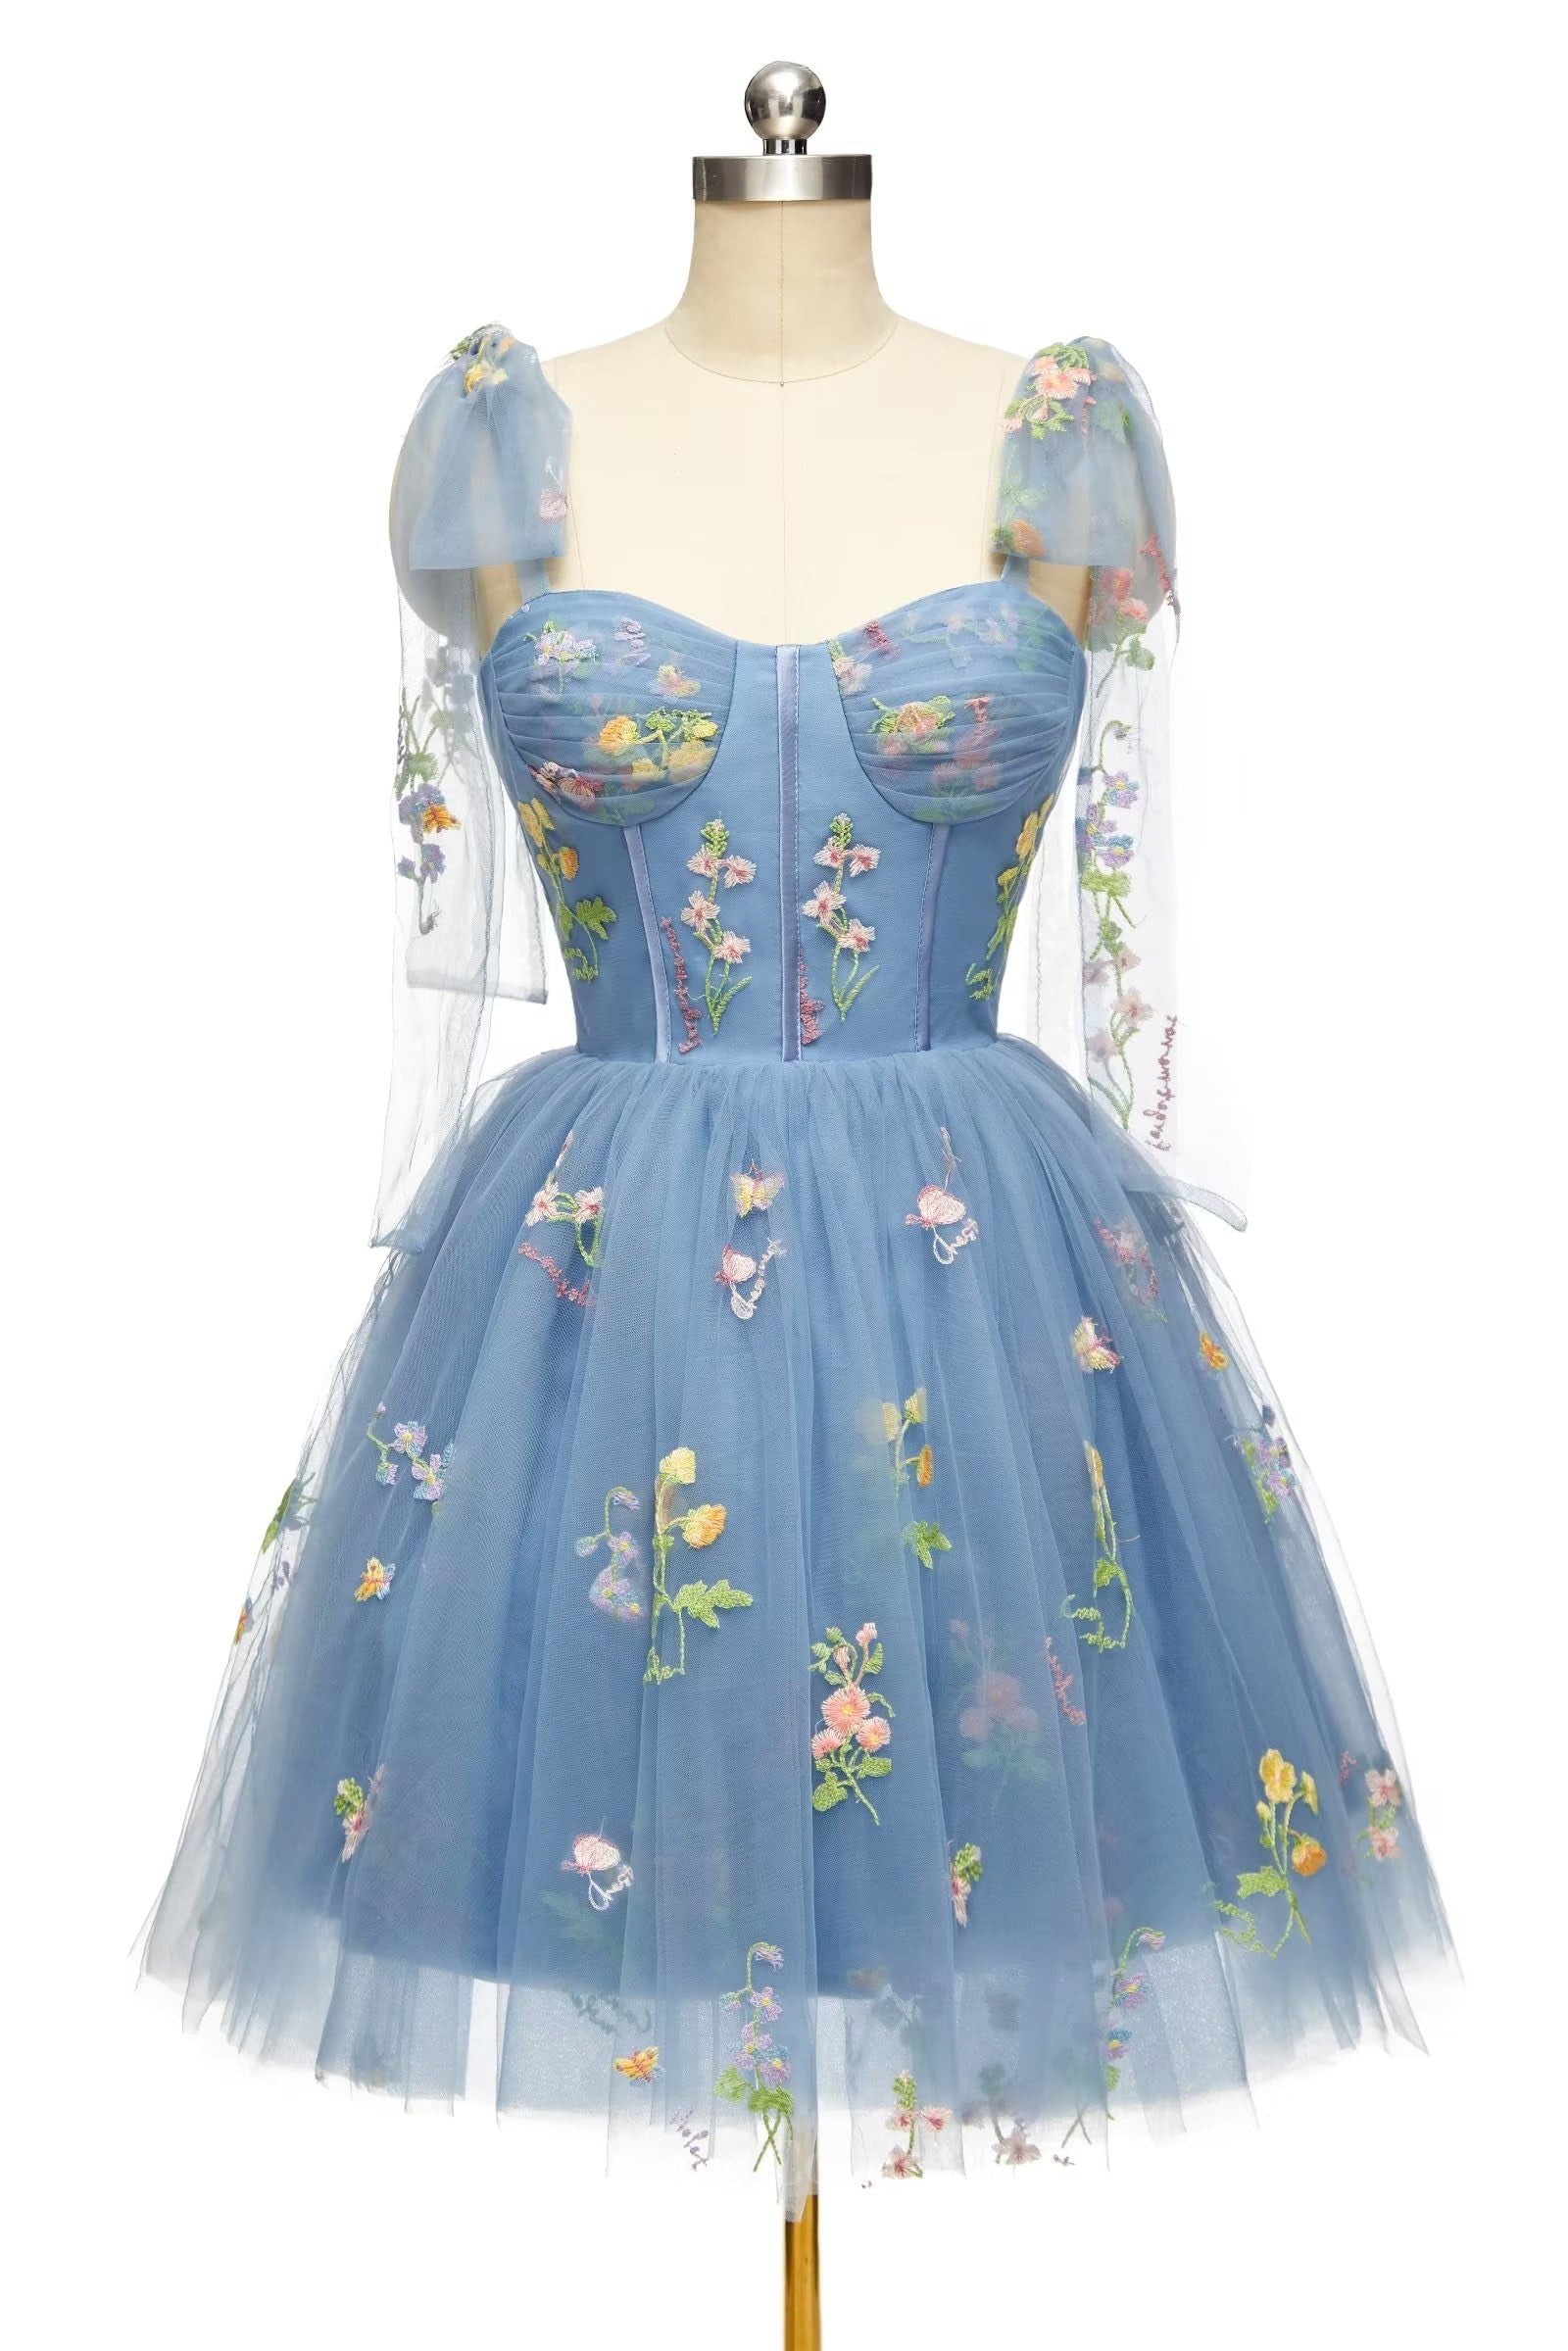 Green Prom Dress, Blue Floral Corset A-line Homecoming Dress with Tie Shoulders